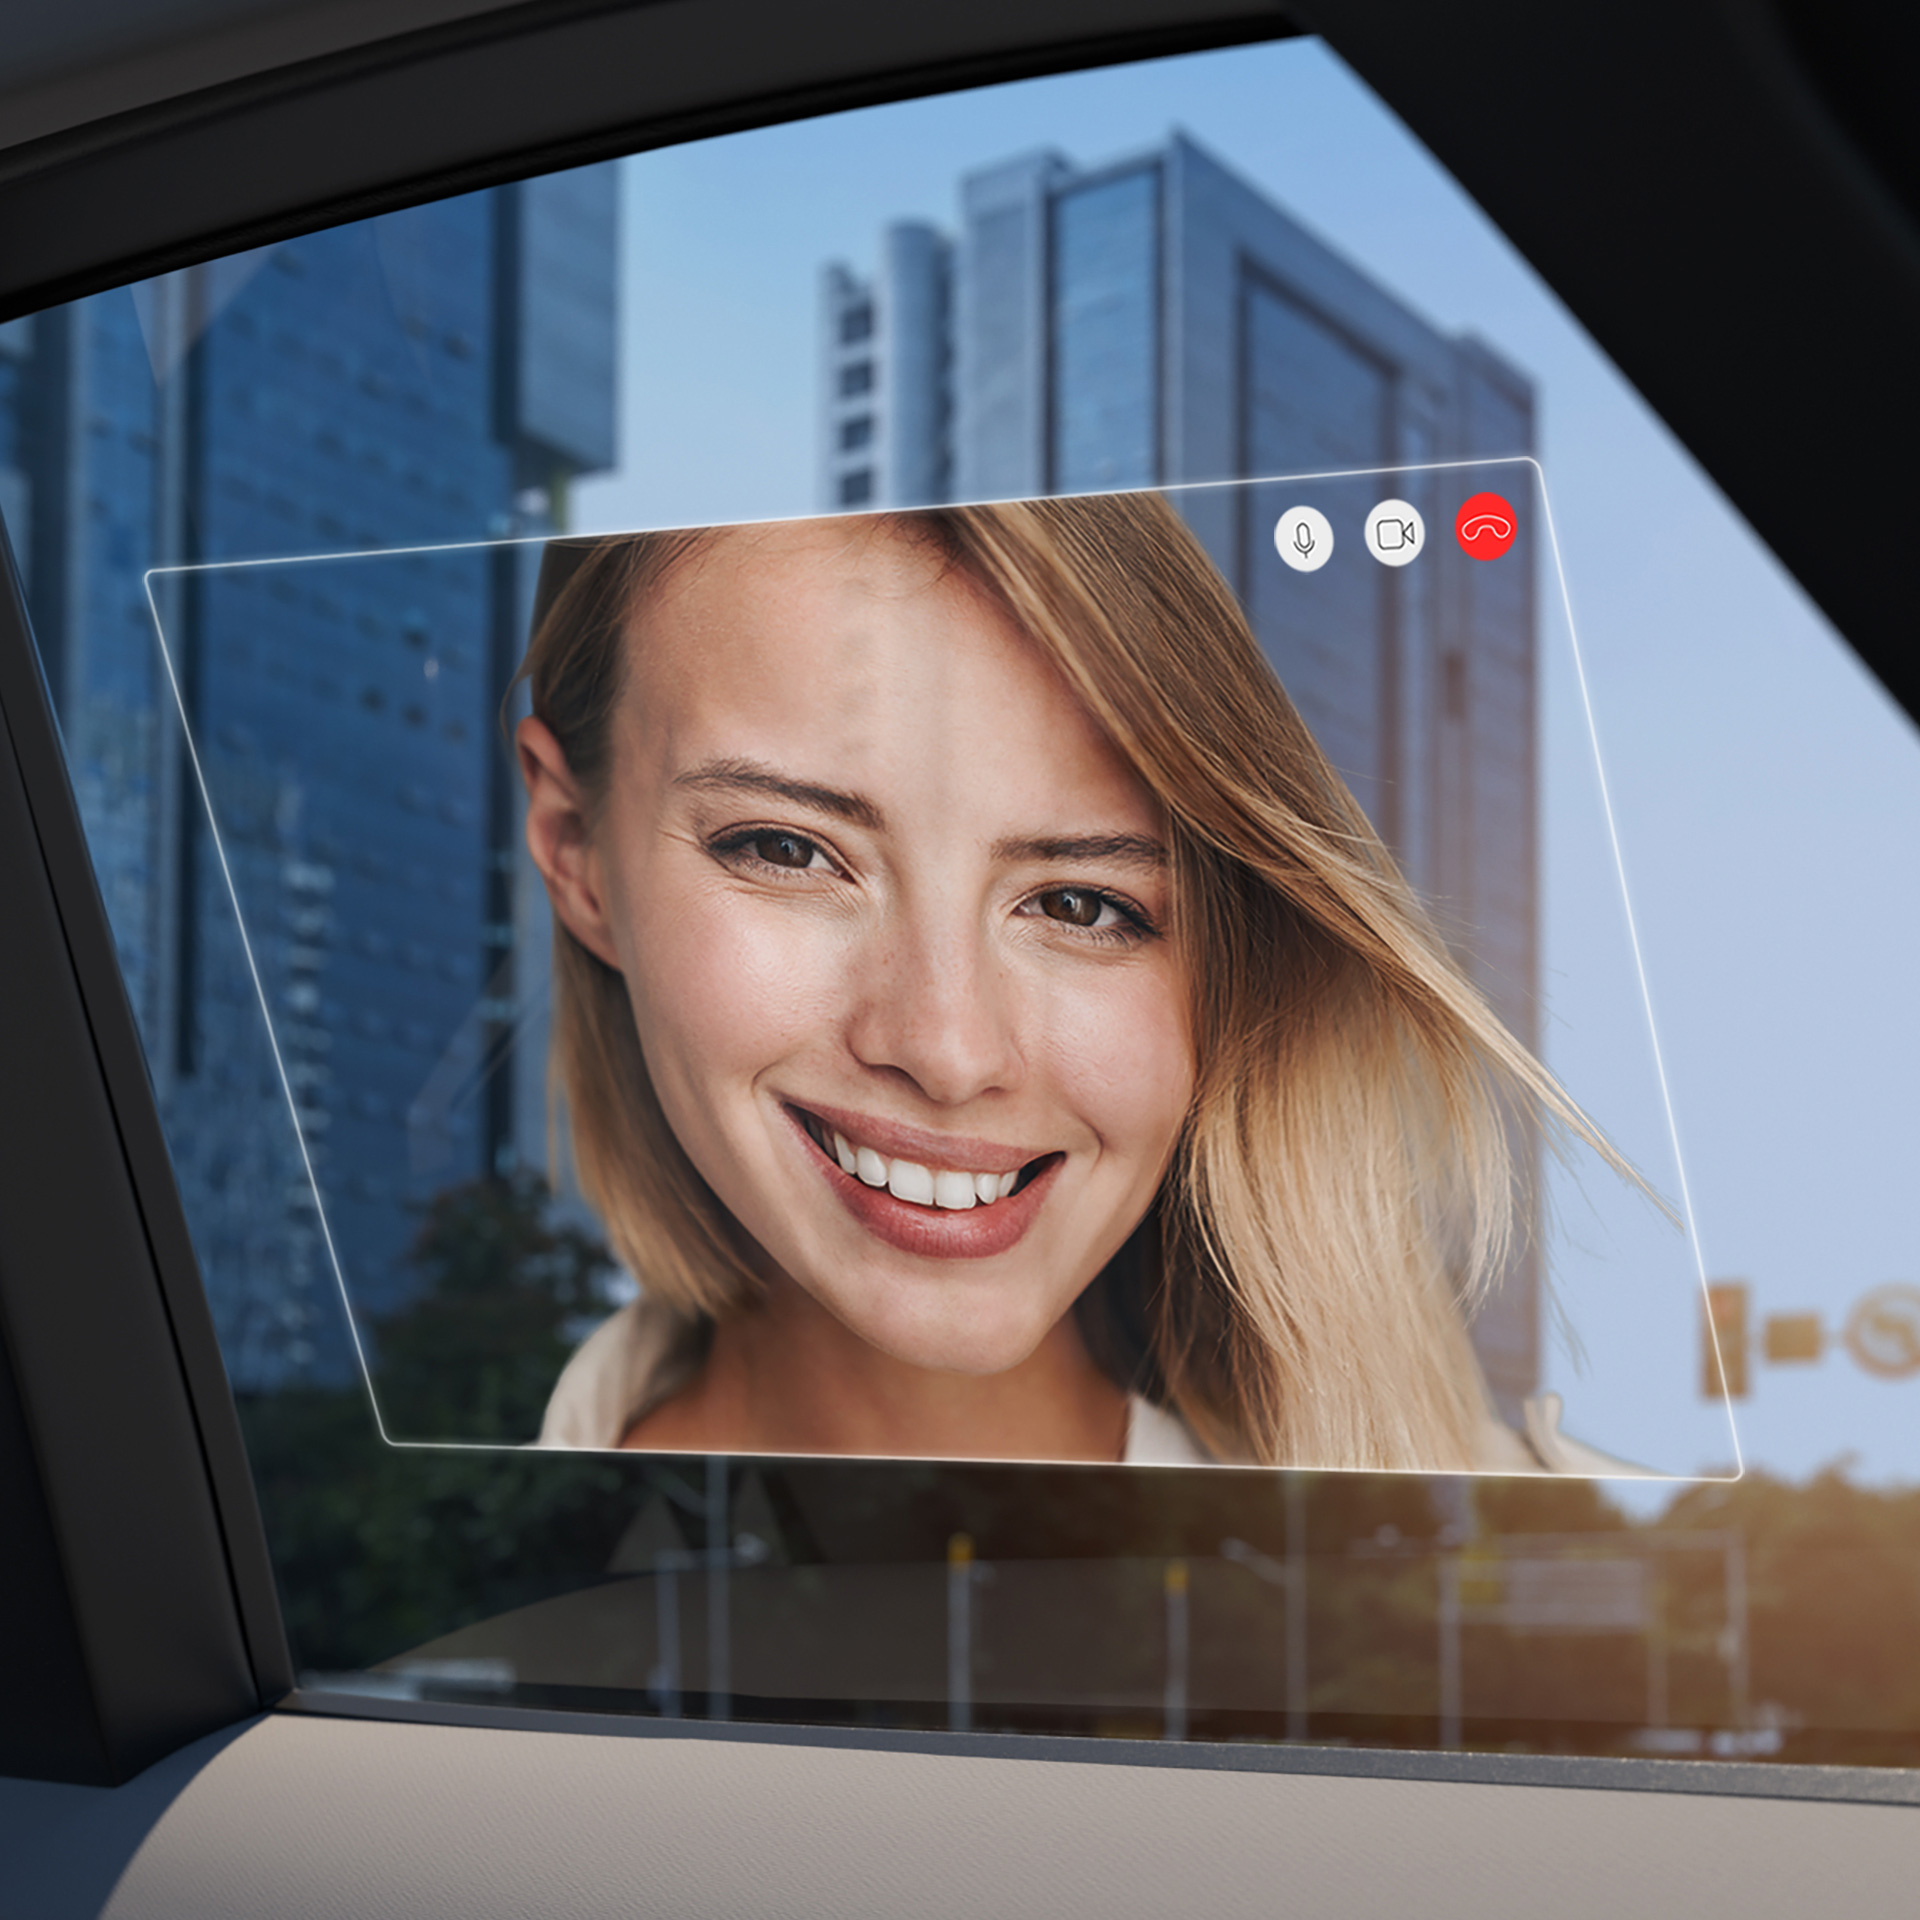 Video chatting using the back window of a car